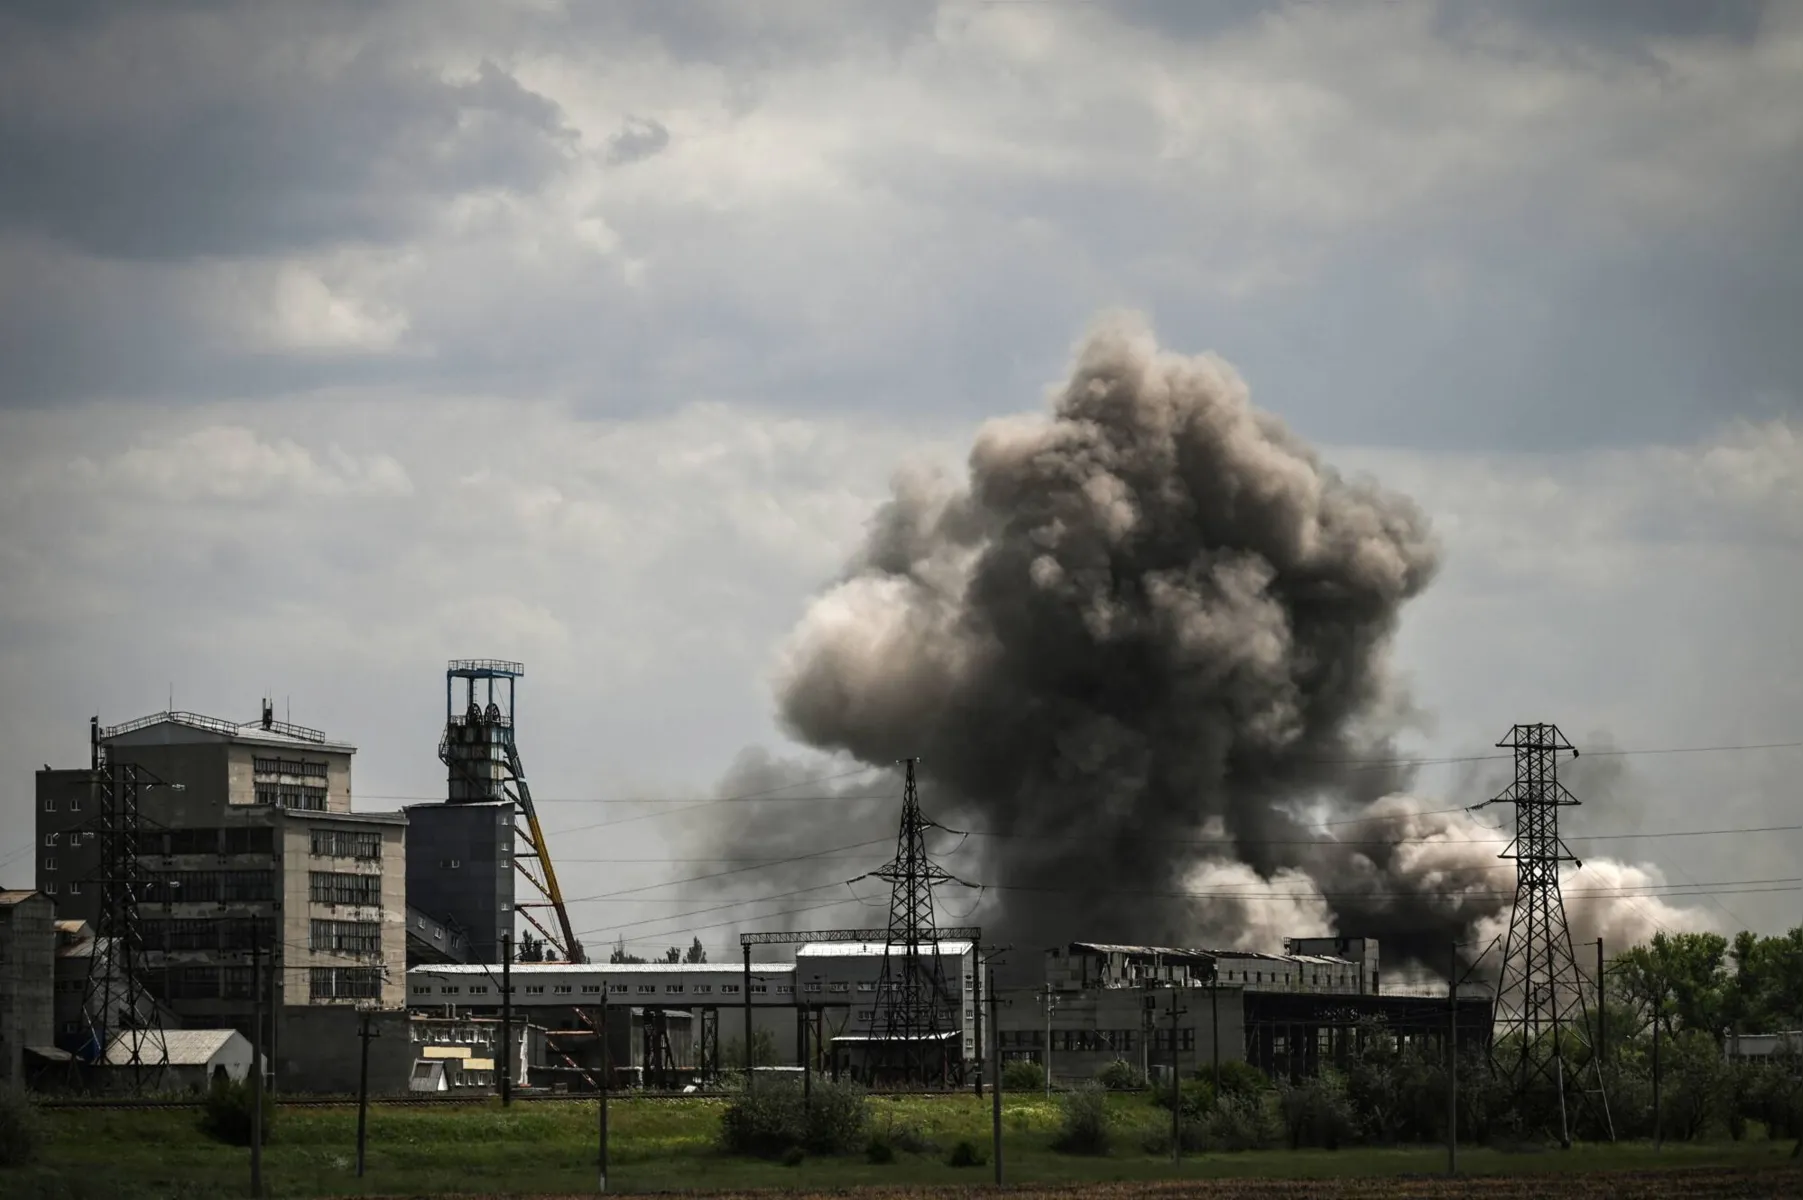 Smoke and dirt ascends after a strike at a factory in the city of Soledar at the eastern Ukranian region of Donbas on May 24, 2022, on the 90th day of the Russian invasion of Ukraine. (Photo by ARIS MESSINIS / AFP)